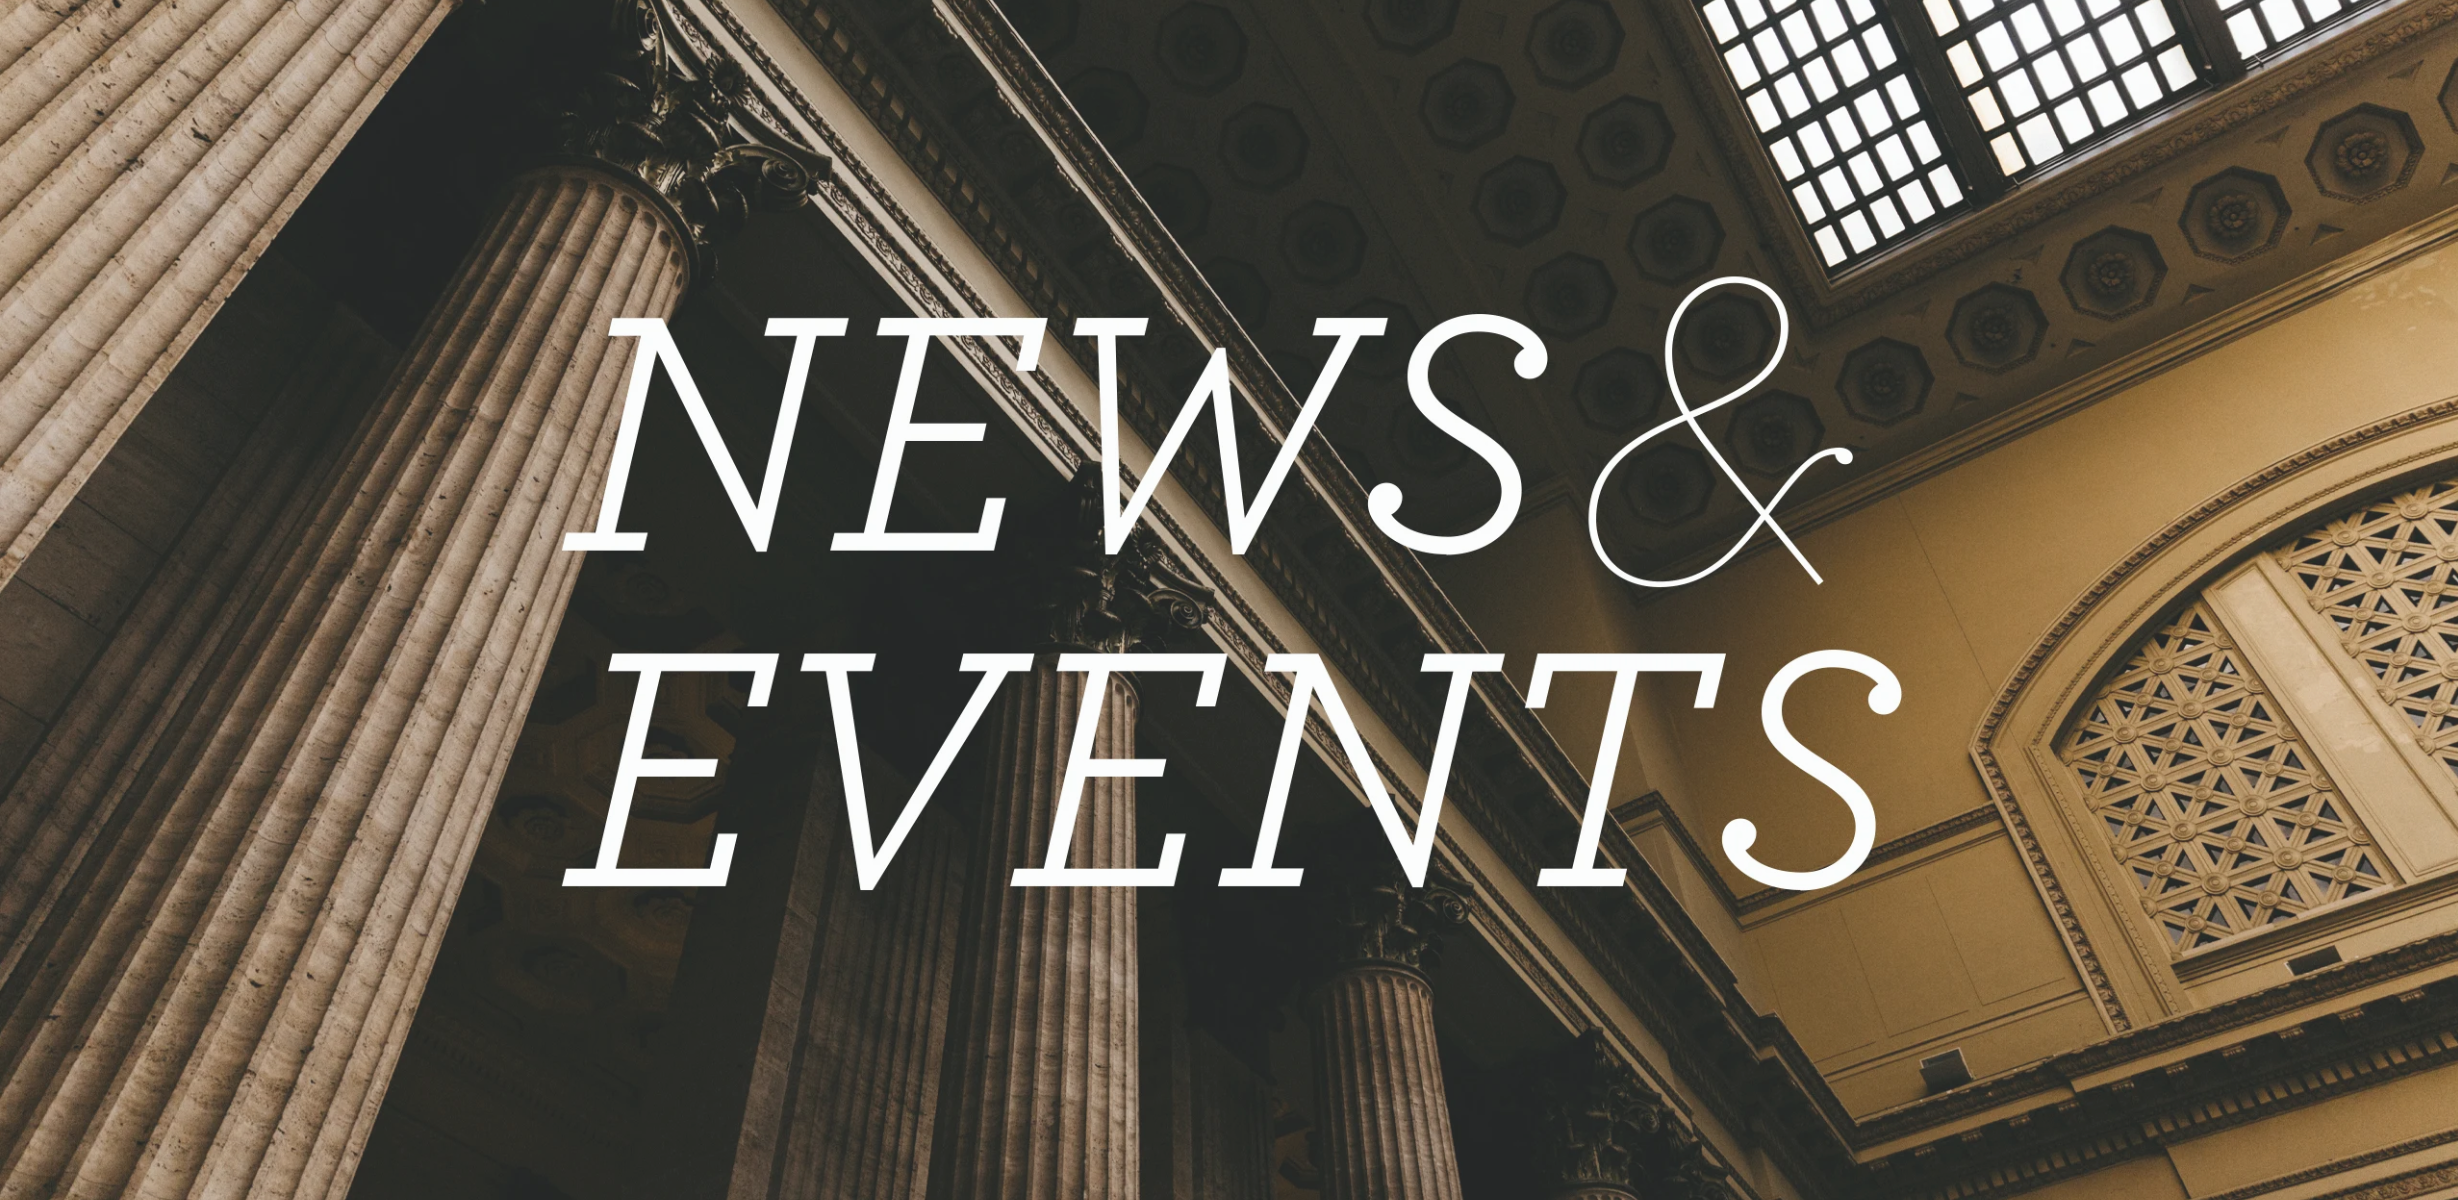 news and events header